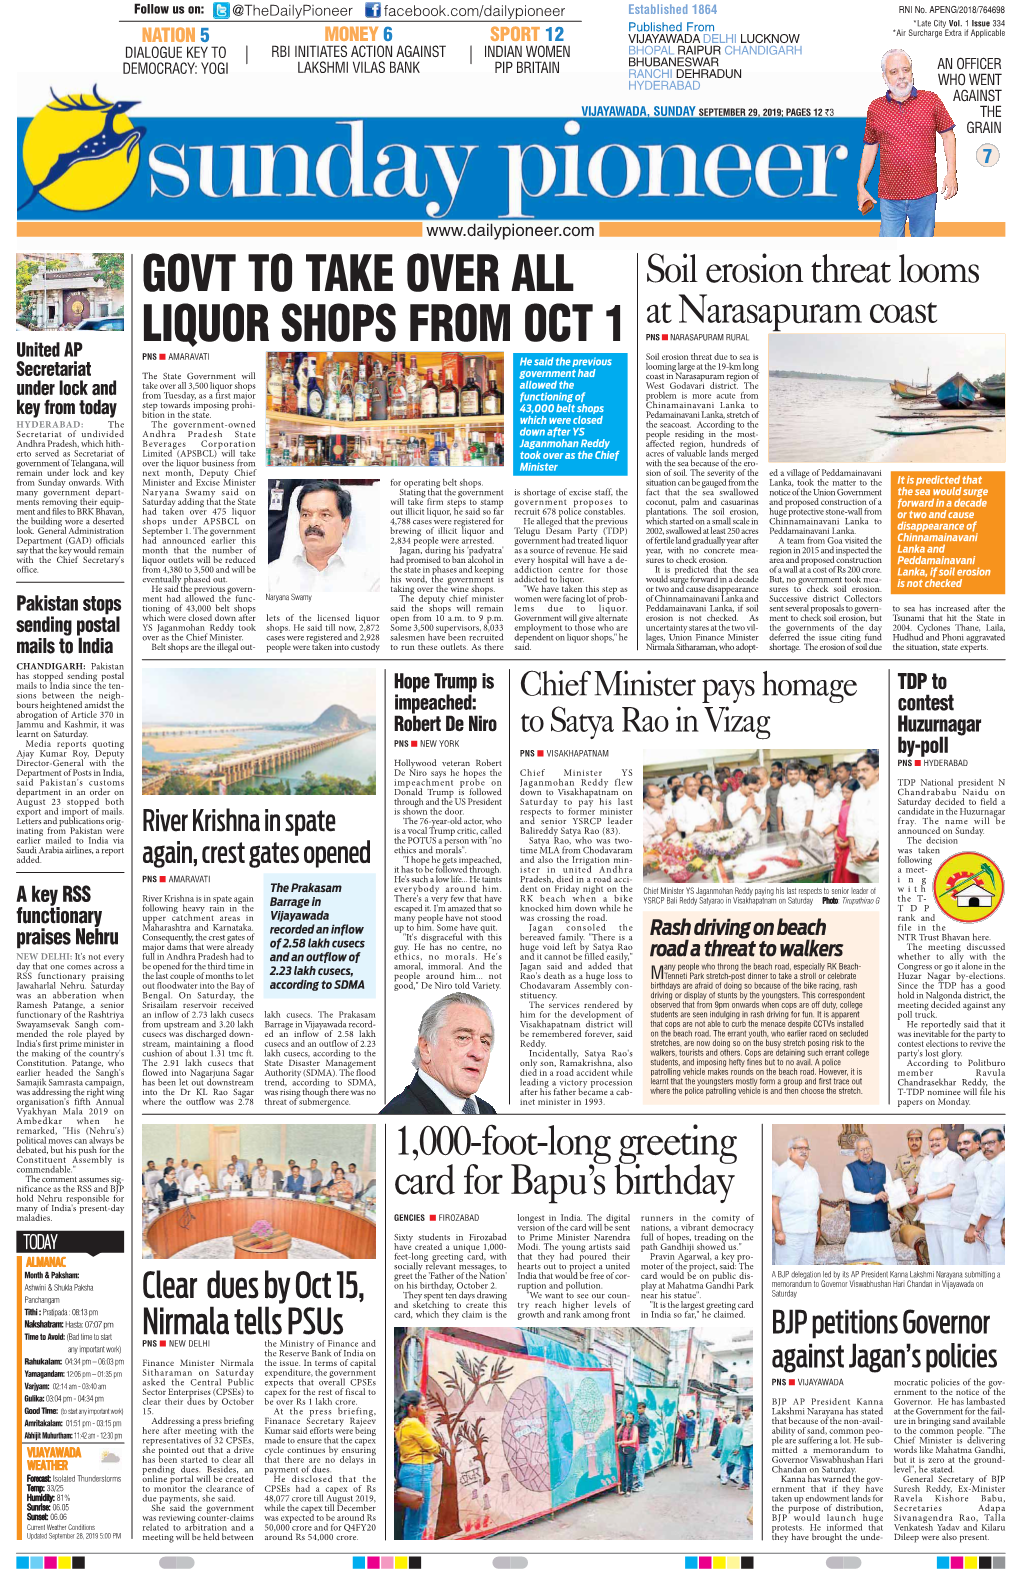 Govt to Take Over All Liquor Shops from Oct 1